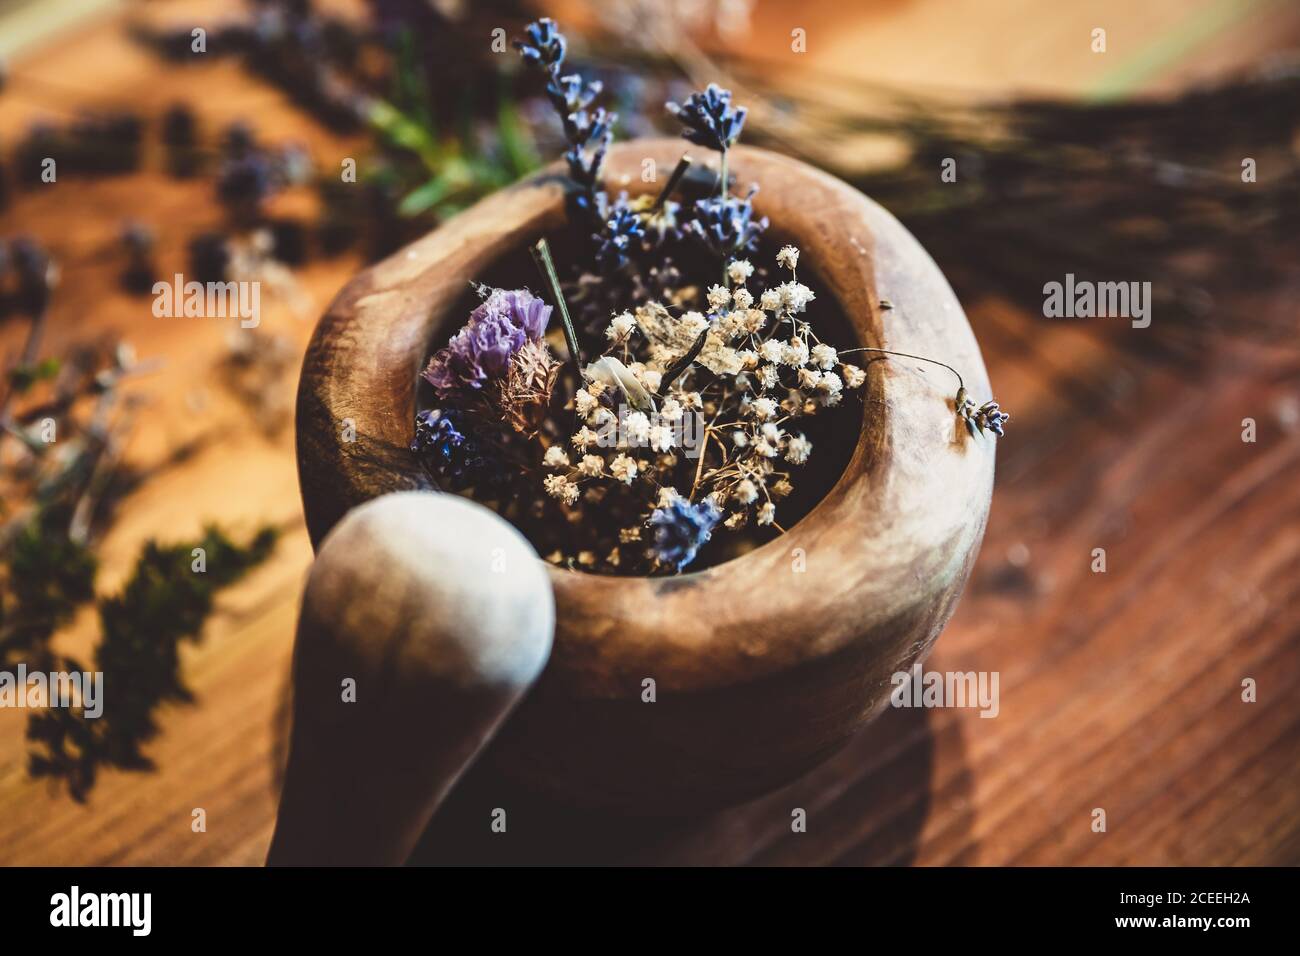 Mortar with dried healing herbs and flowers, ritual purification and cleansing, closeup Stock Photo